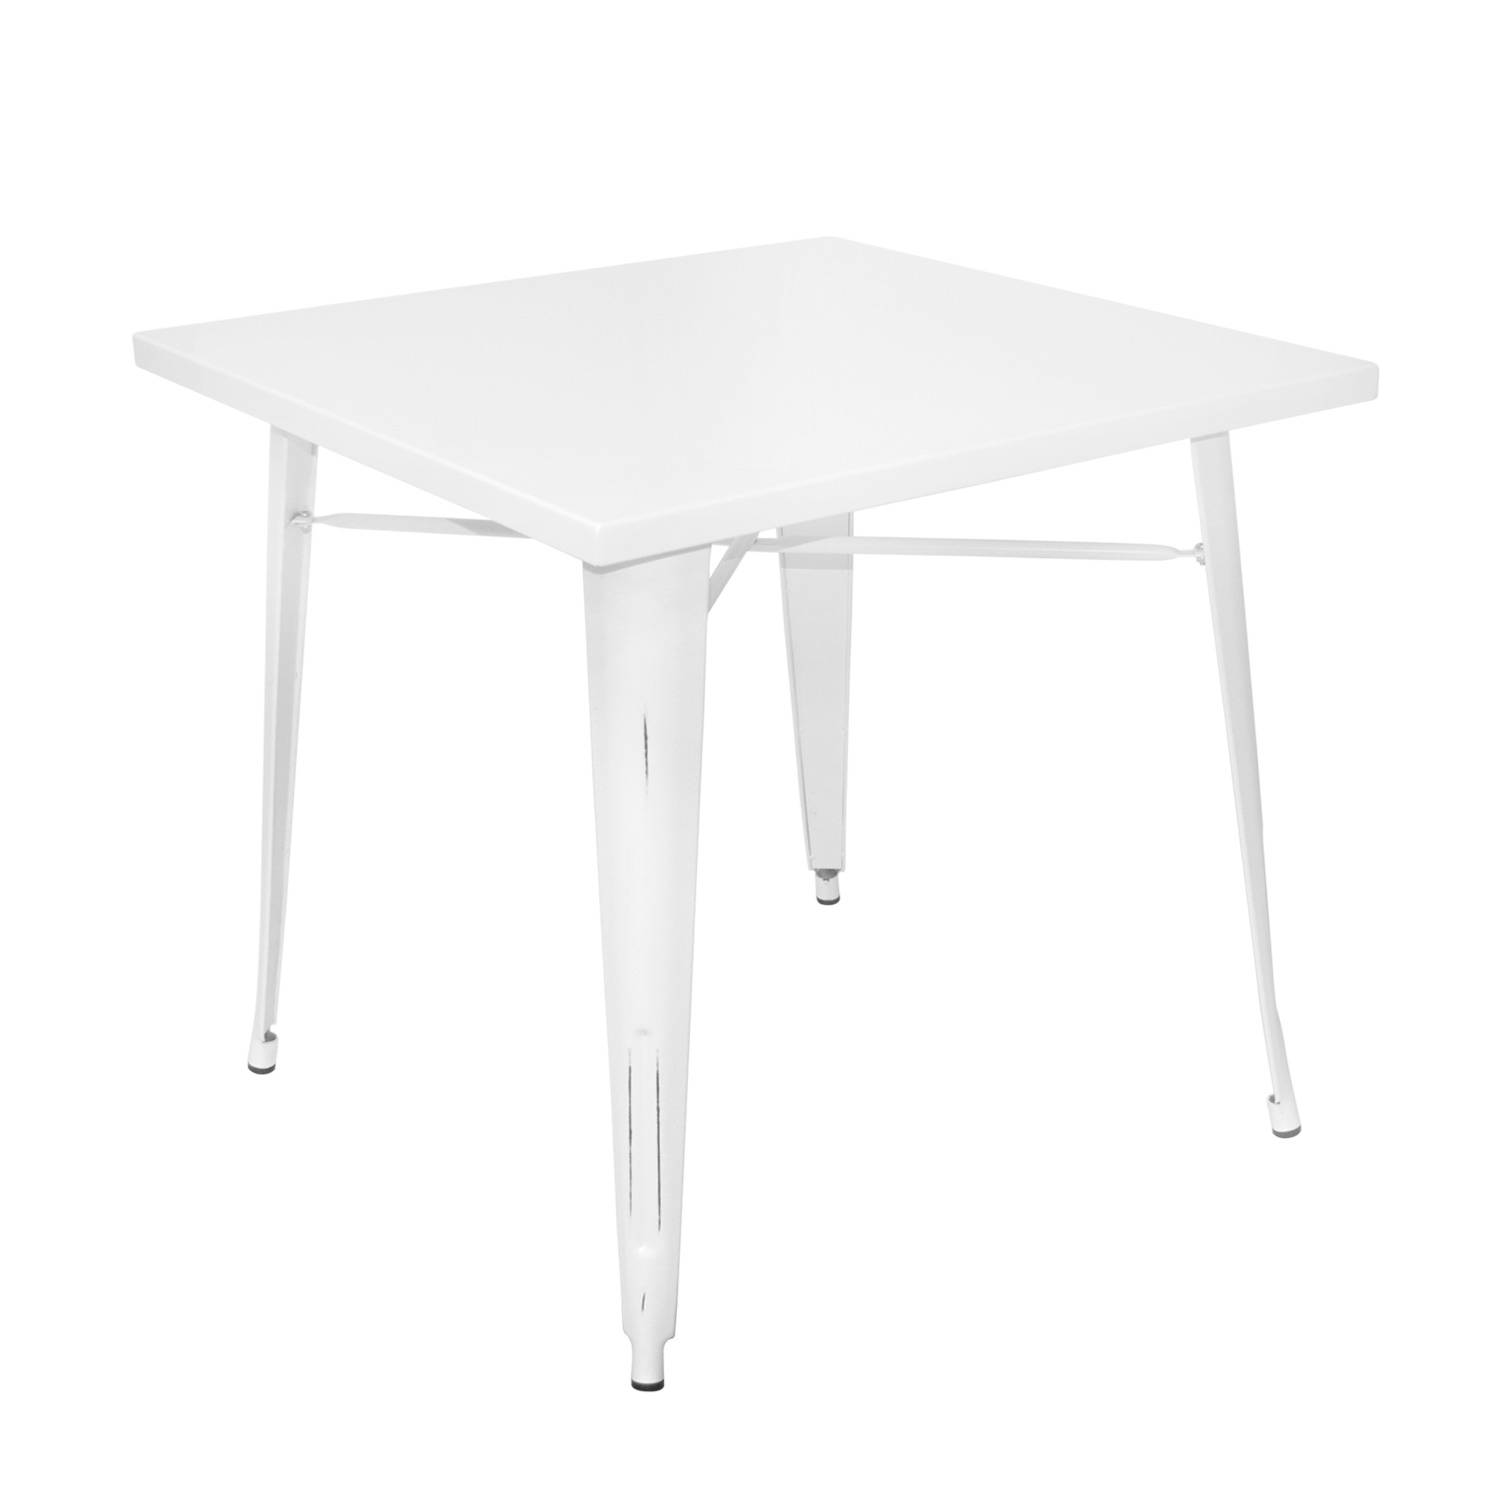 TABLE LANK OLD BLANCHE